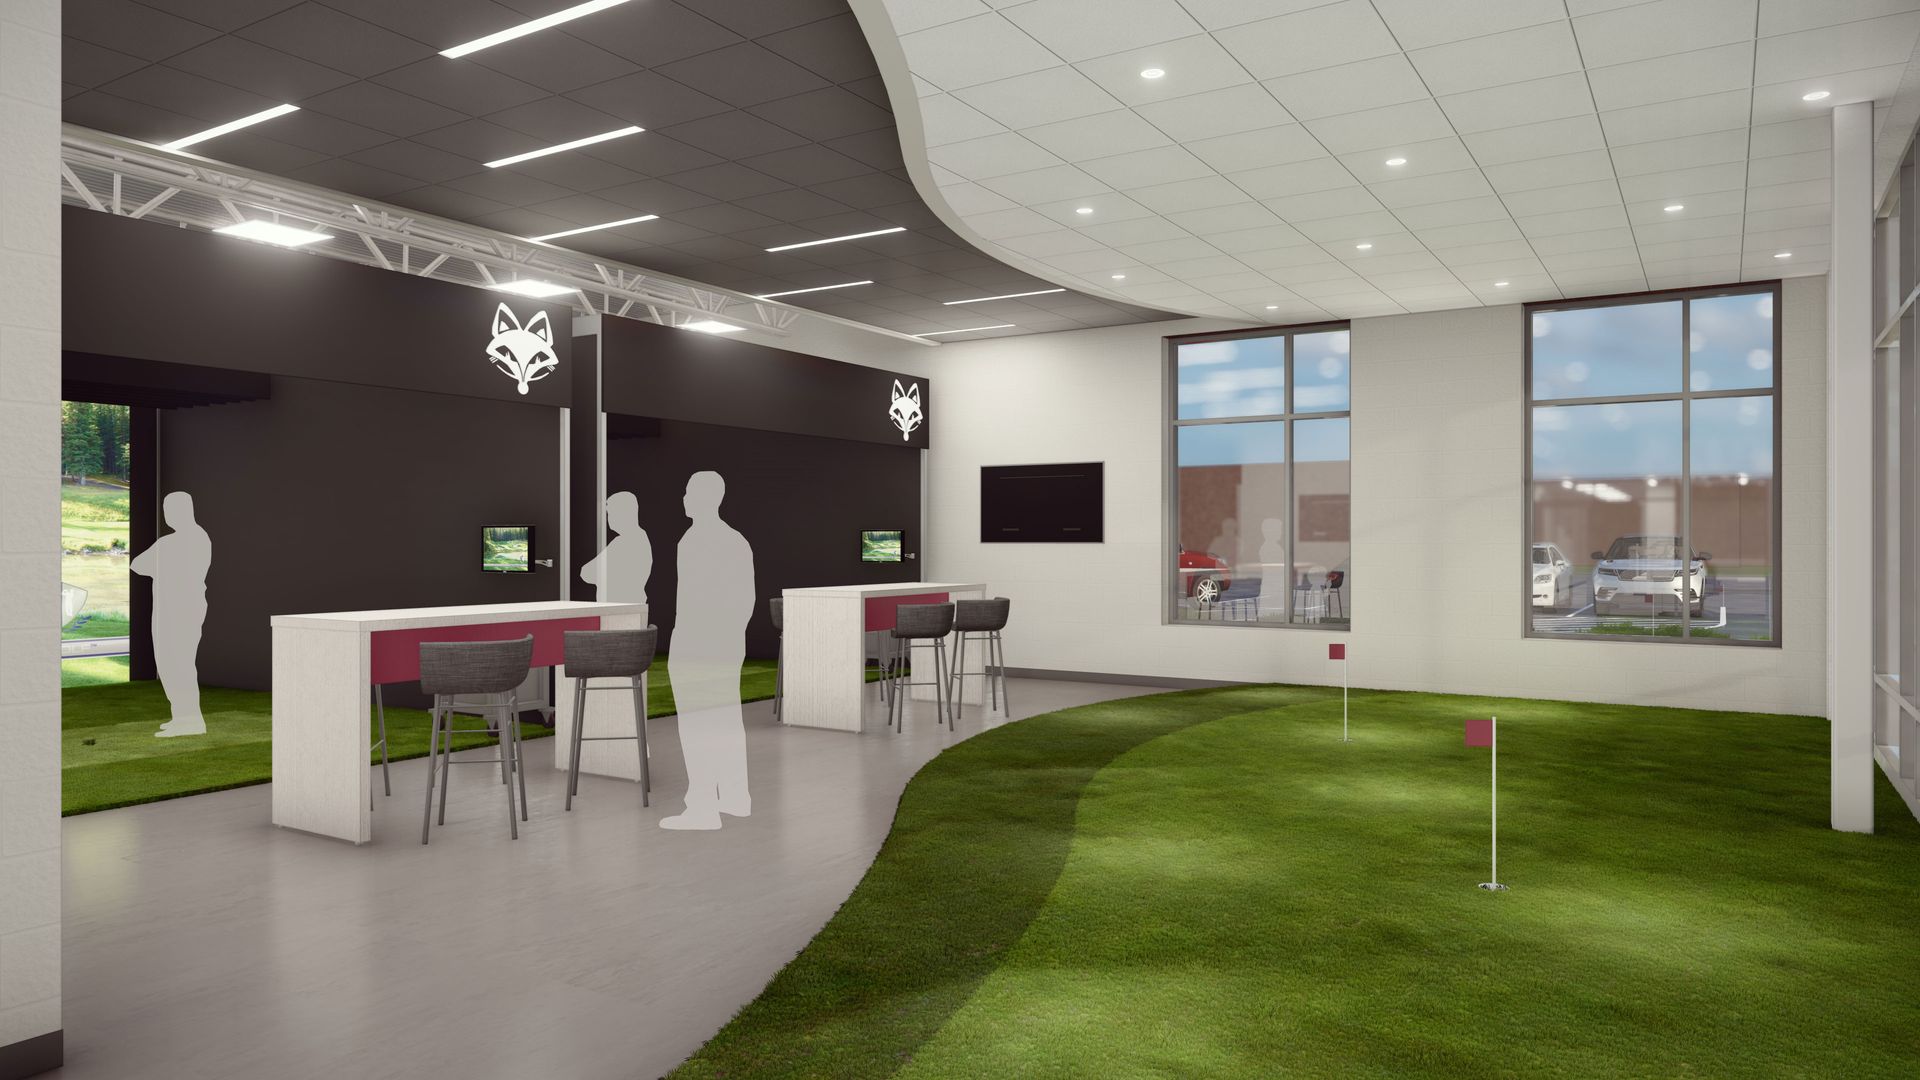 Rendering of the golf area in the sports center